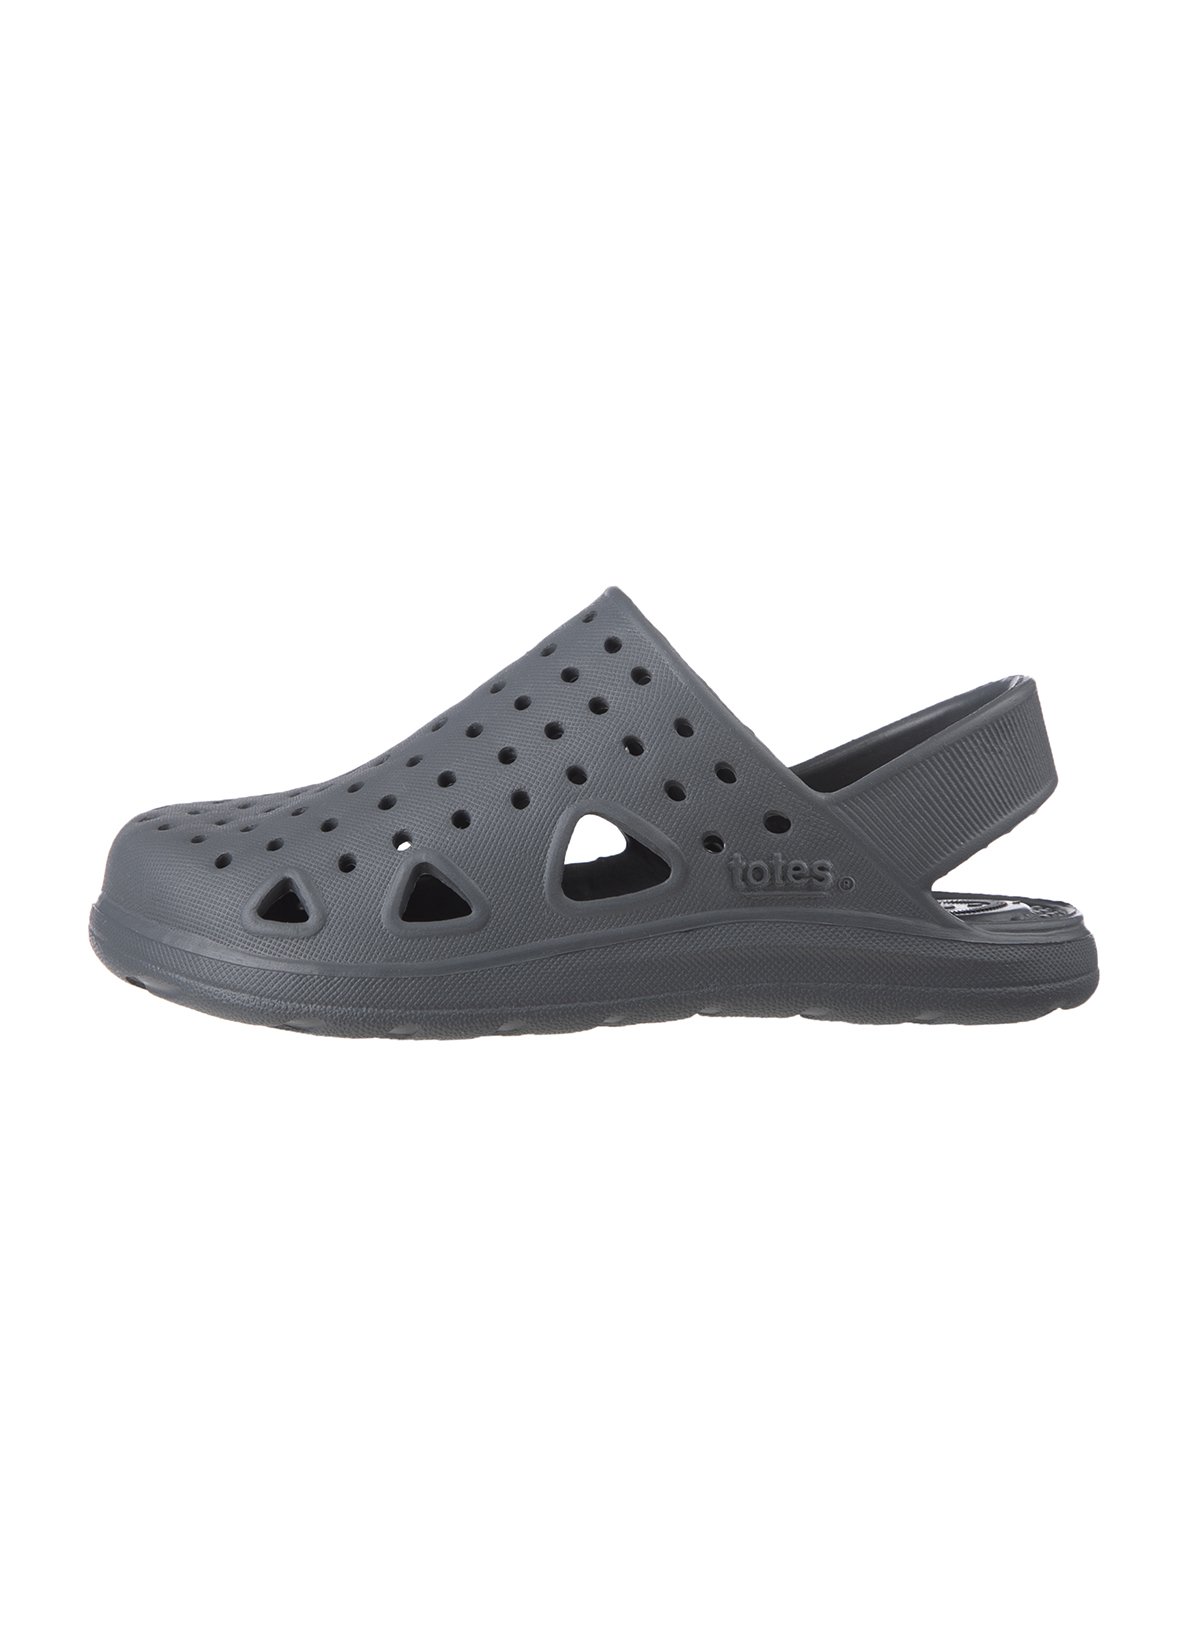 Sol Bounce Grey Clogs Review